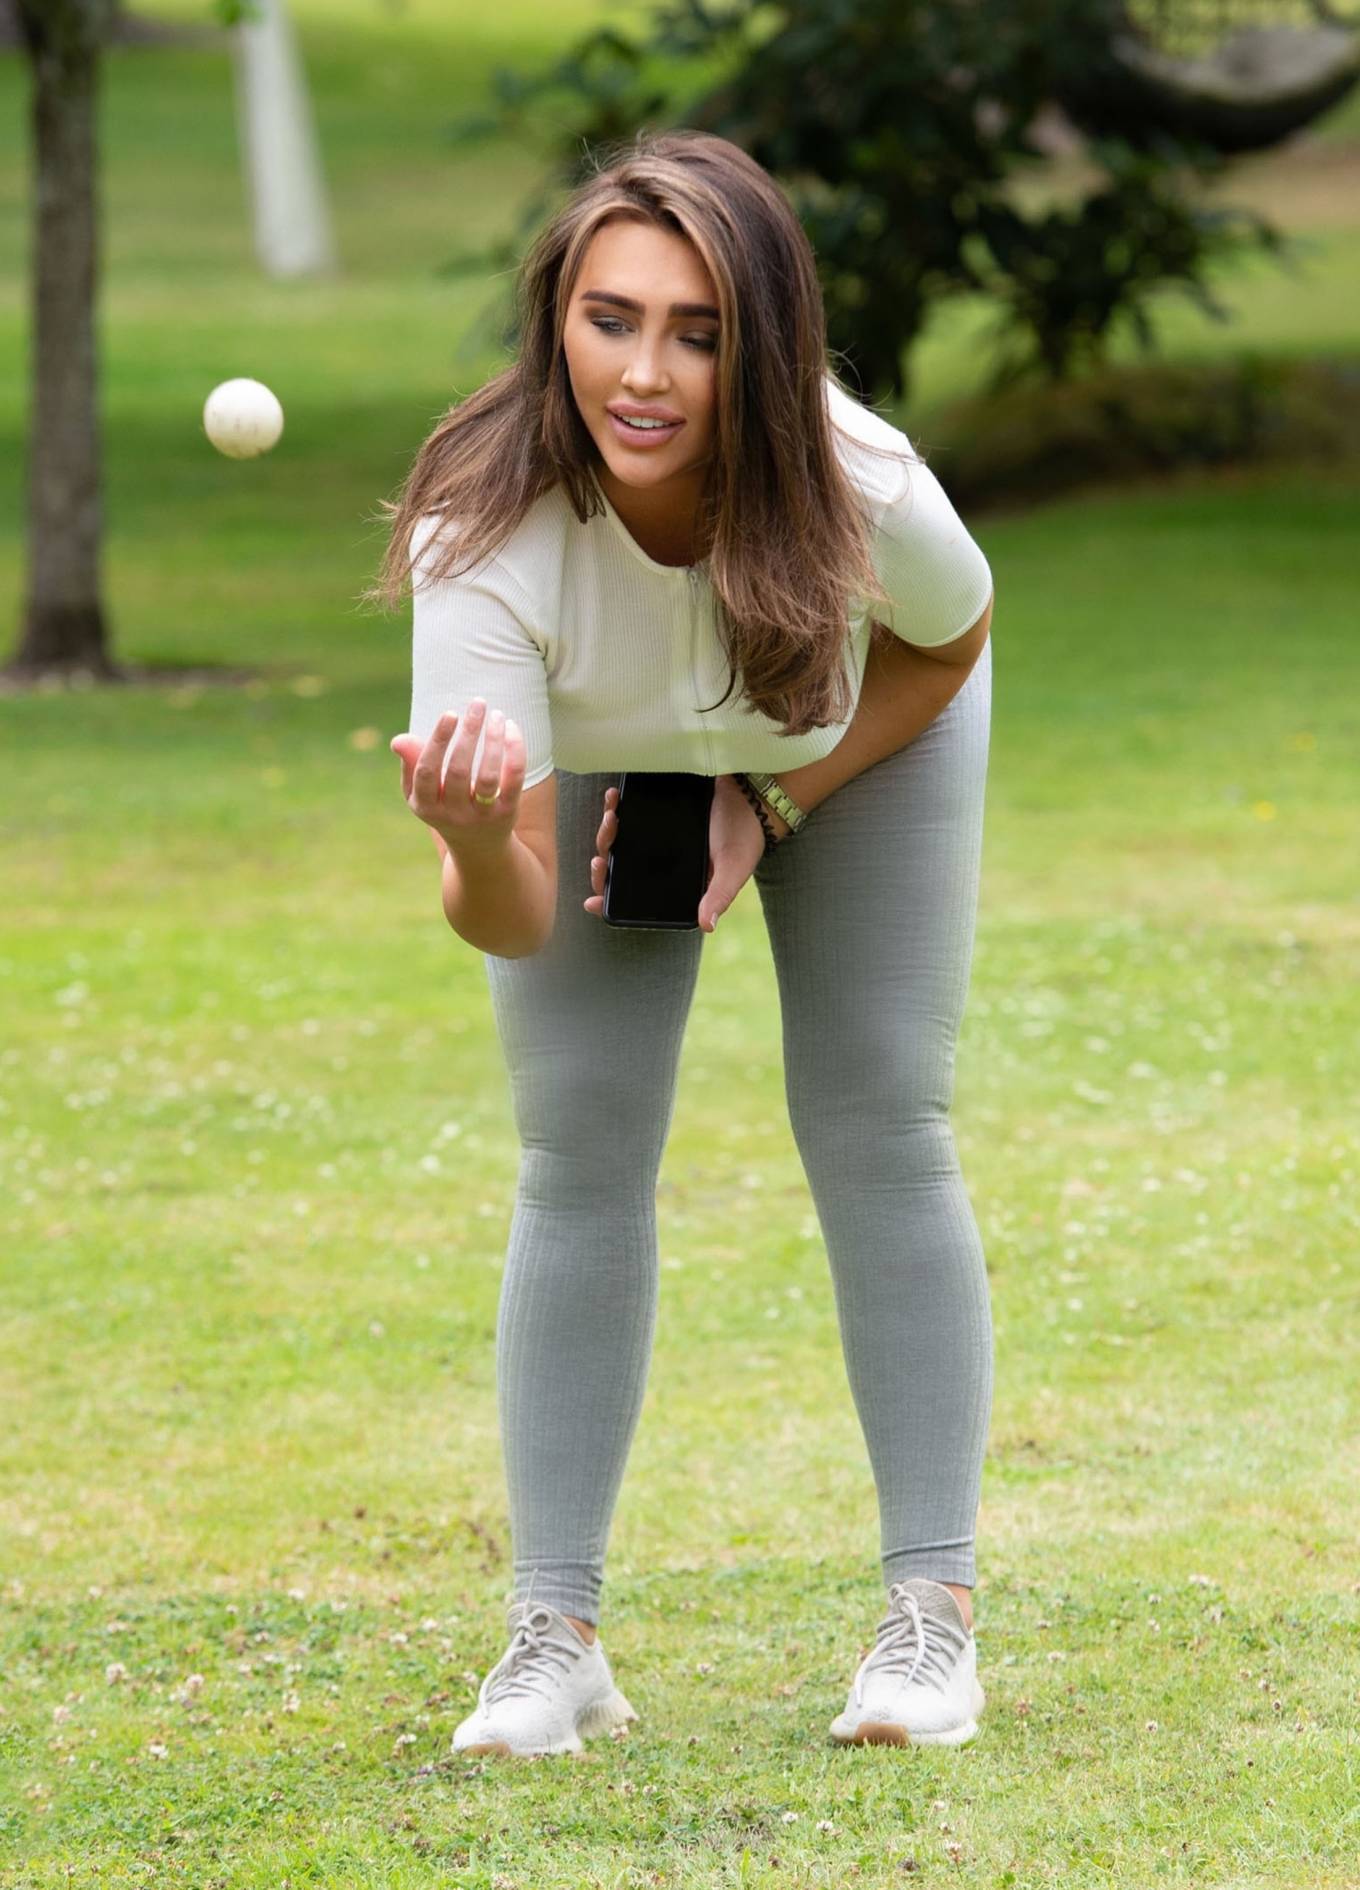 Lauren Goodger 2020 : Lauren Goodger – Pictured while playing with a Dachshund in a park in Essex -12